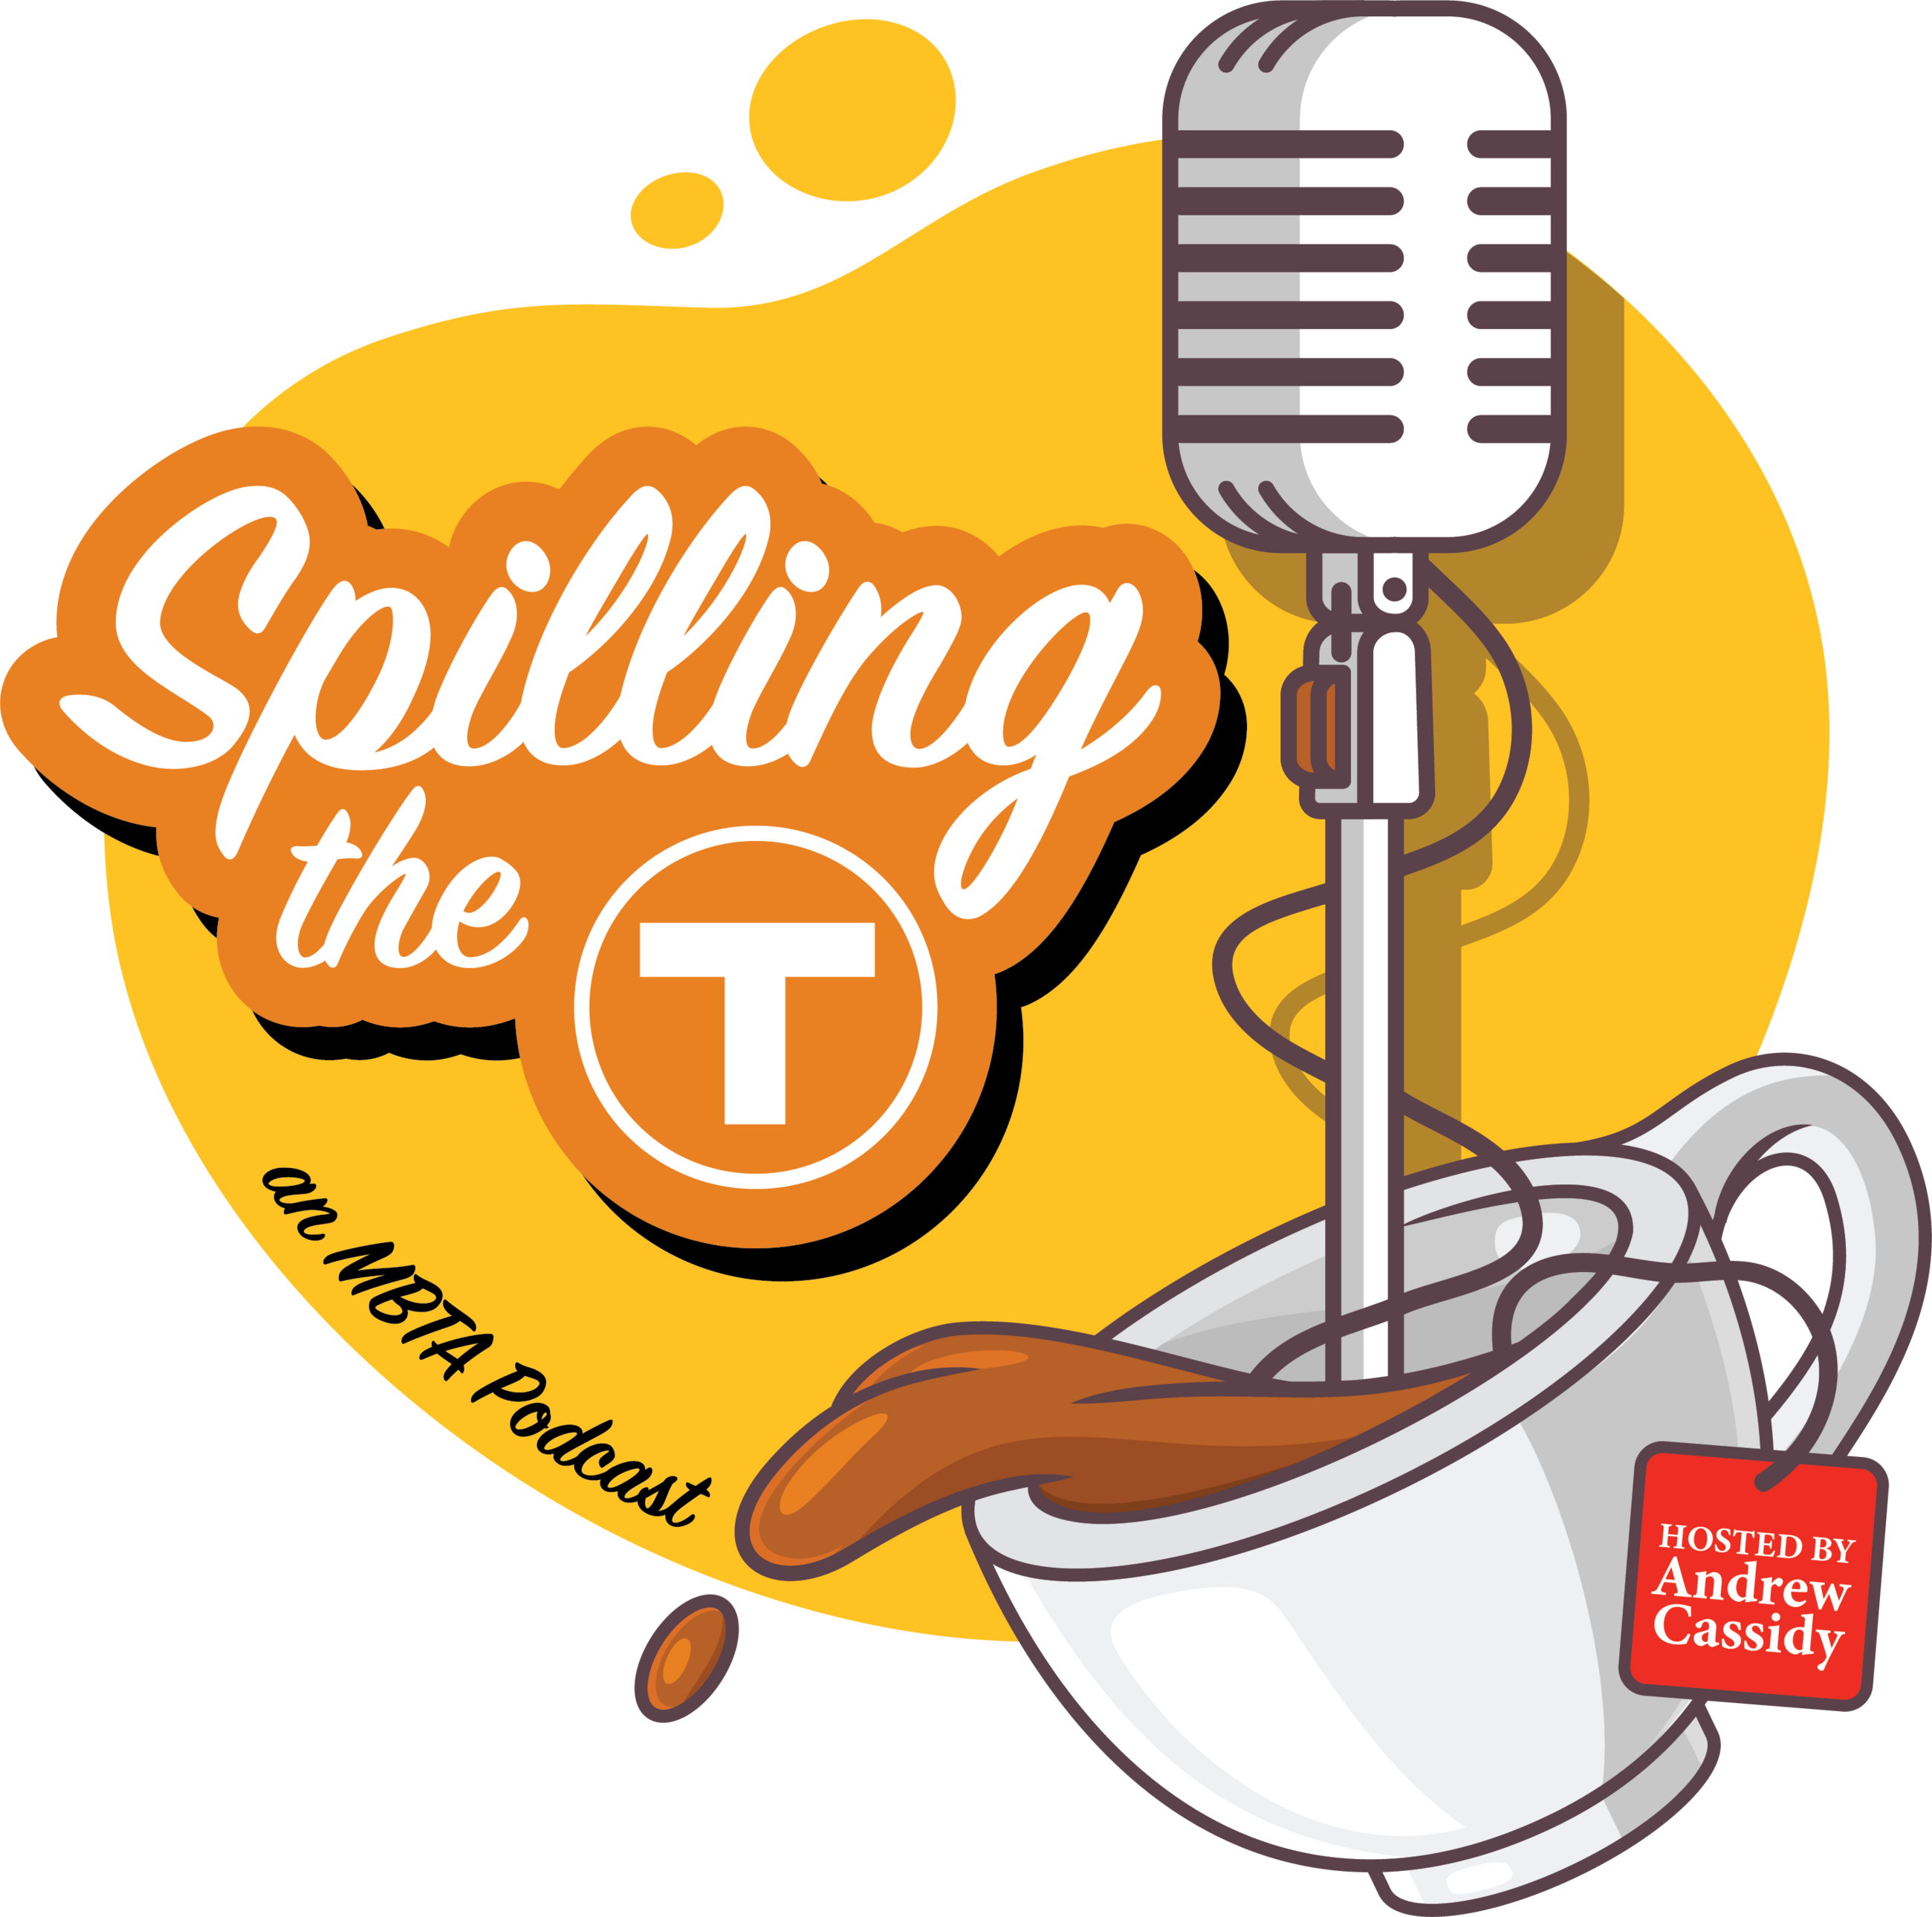 an image of a microphone and a spilt cup of tea, with the words Spilling the T and MBT podcast hosted by Andrew Cassidy overlayed